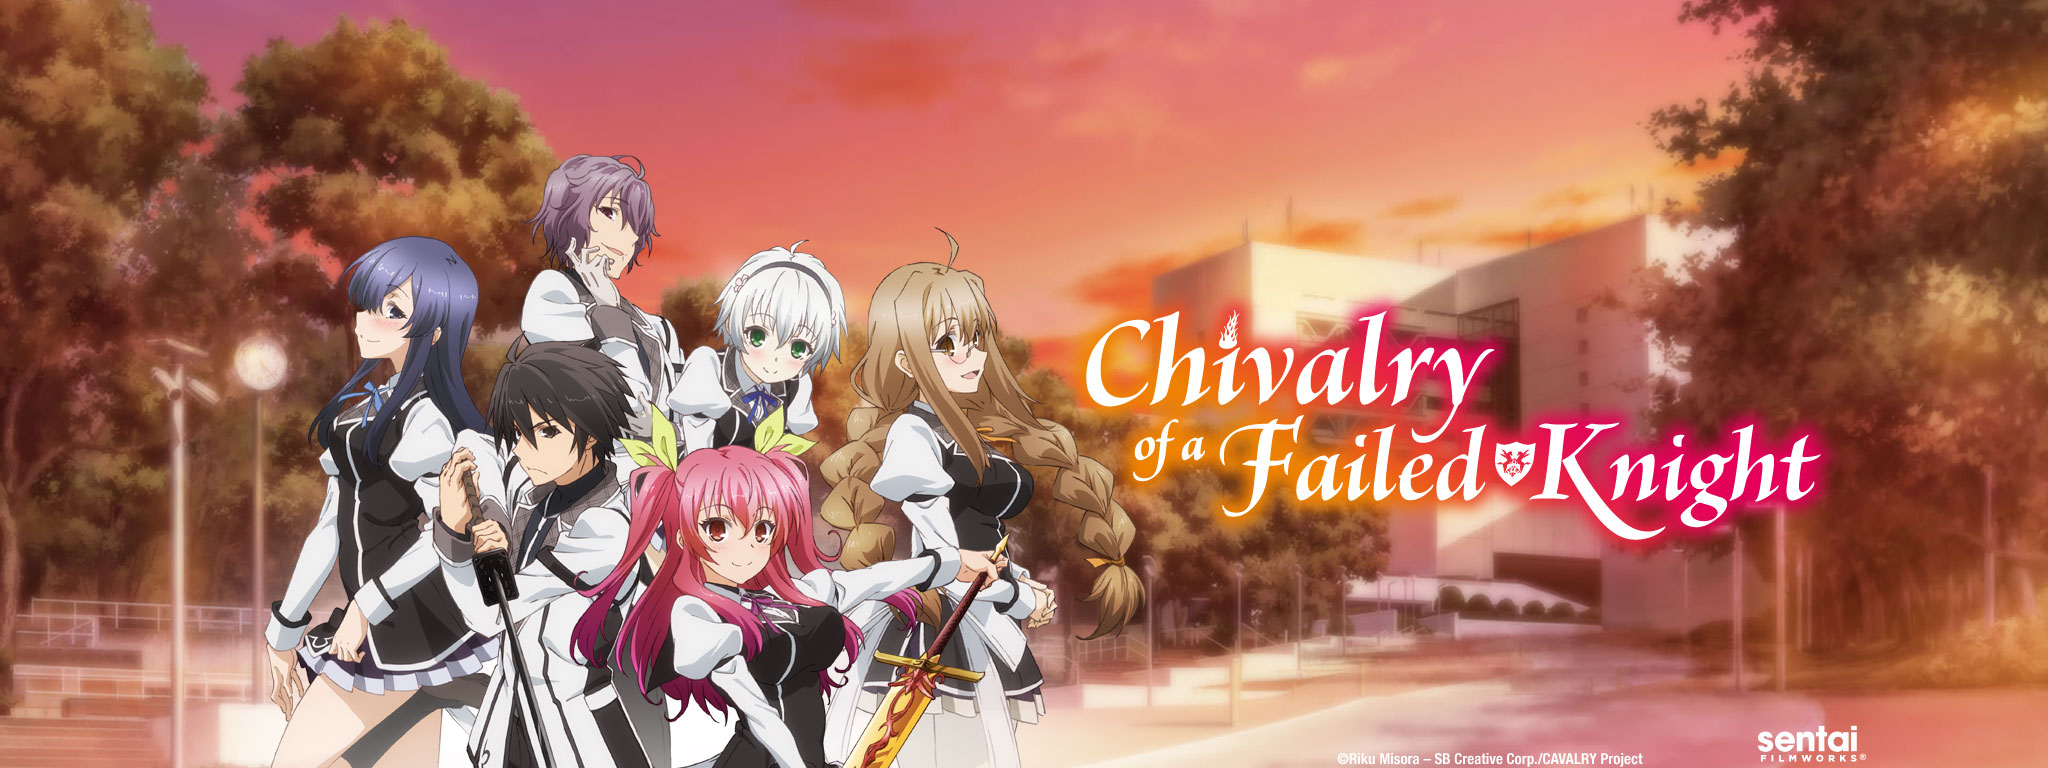 Title Art for Chivalry of a Failed Knight